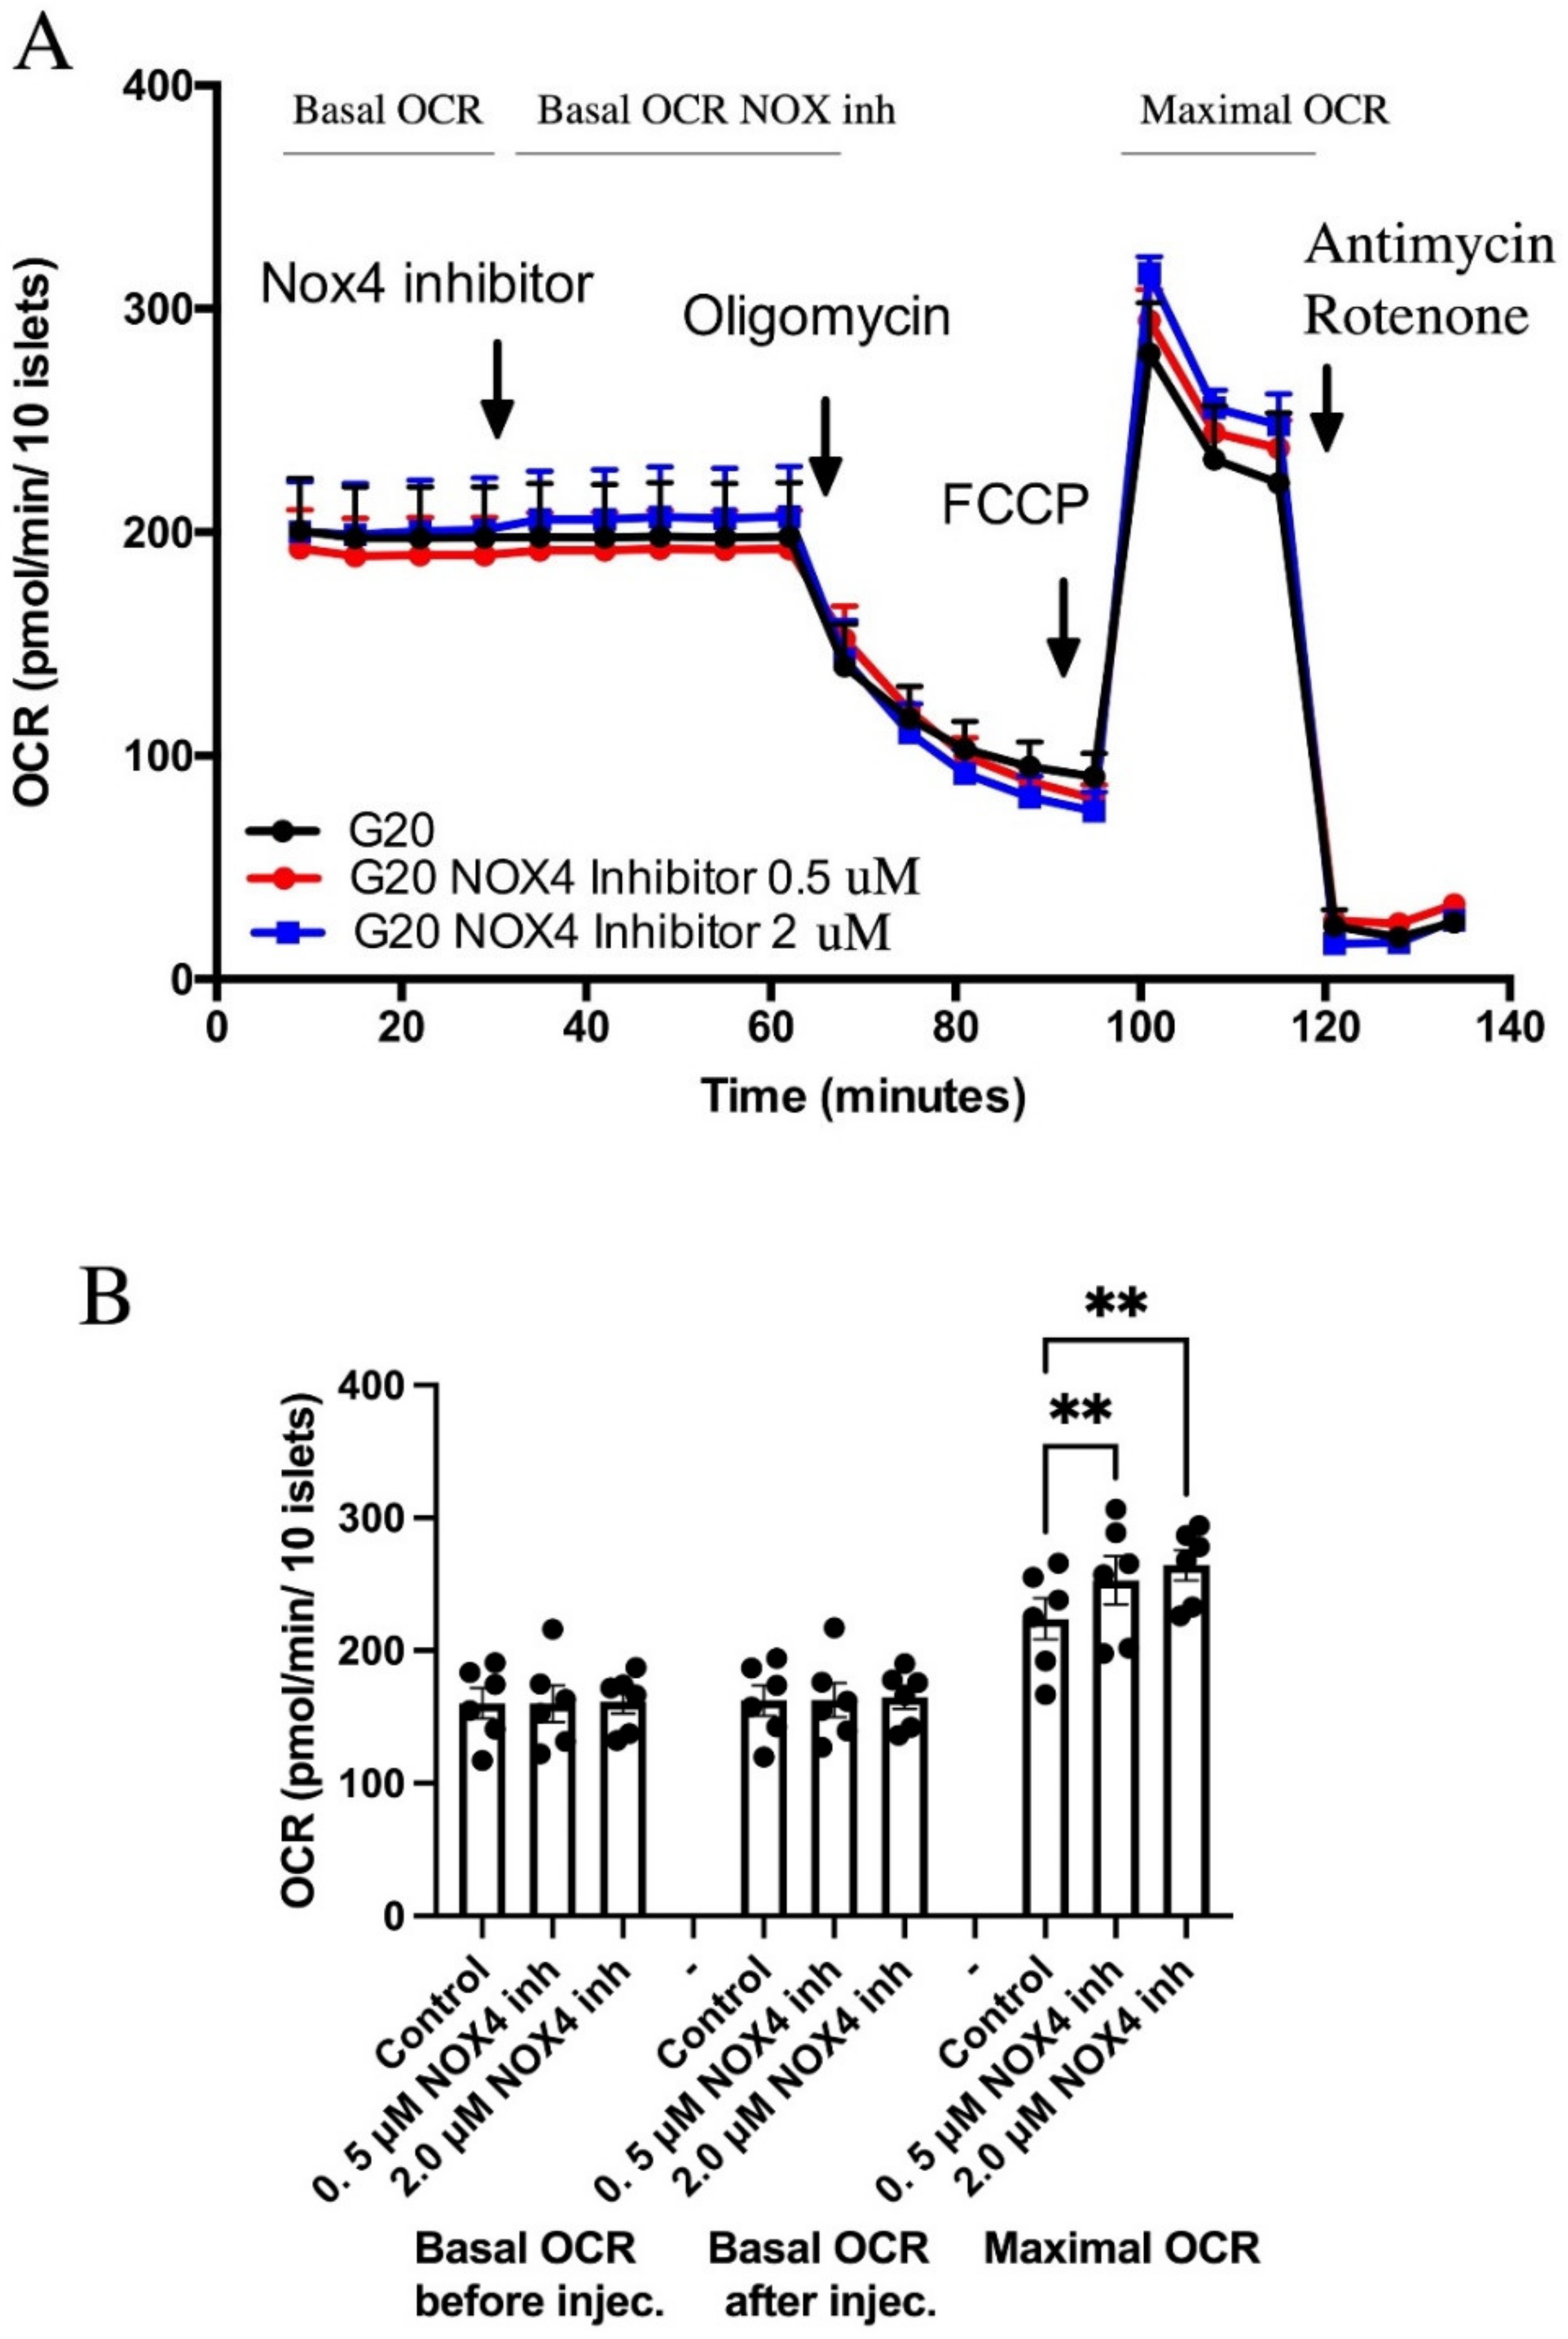 Biomedicines | Free Full-Text | Pharmacological Inhibition of NOX4 Improves  Mitochondrial Function and Survival in Human Beta-Cells